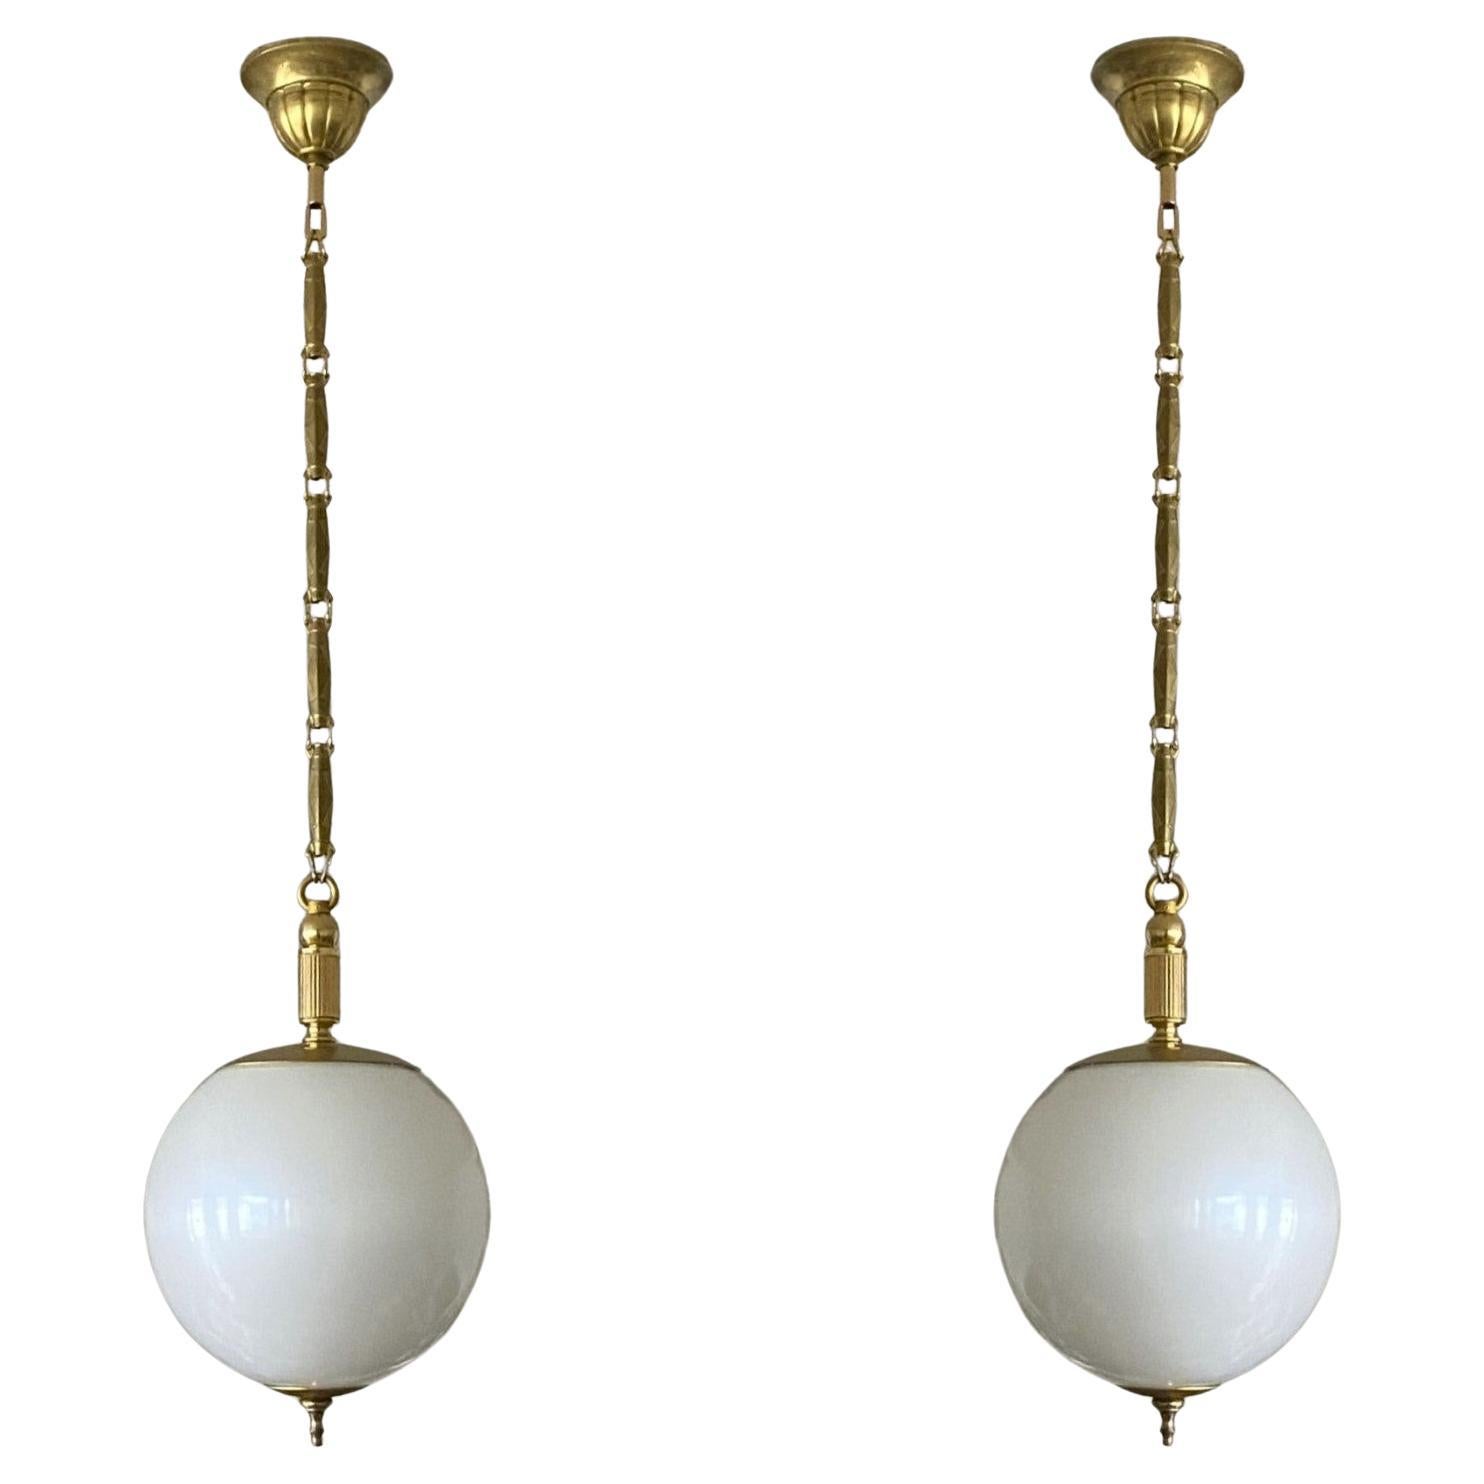 A lovely pair of Murano glass globe pendants in pearl optic, brass mounts, chain and canopy, Italy, 1960s. These beautiful and rare pendants look really like a big pearl hanging from the ceiling. With a single porcelain Edison E27 light socket for a